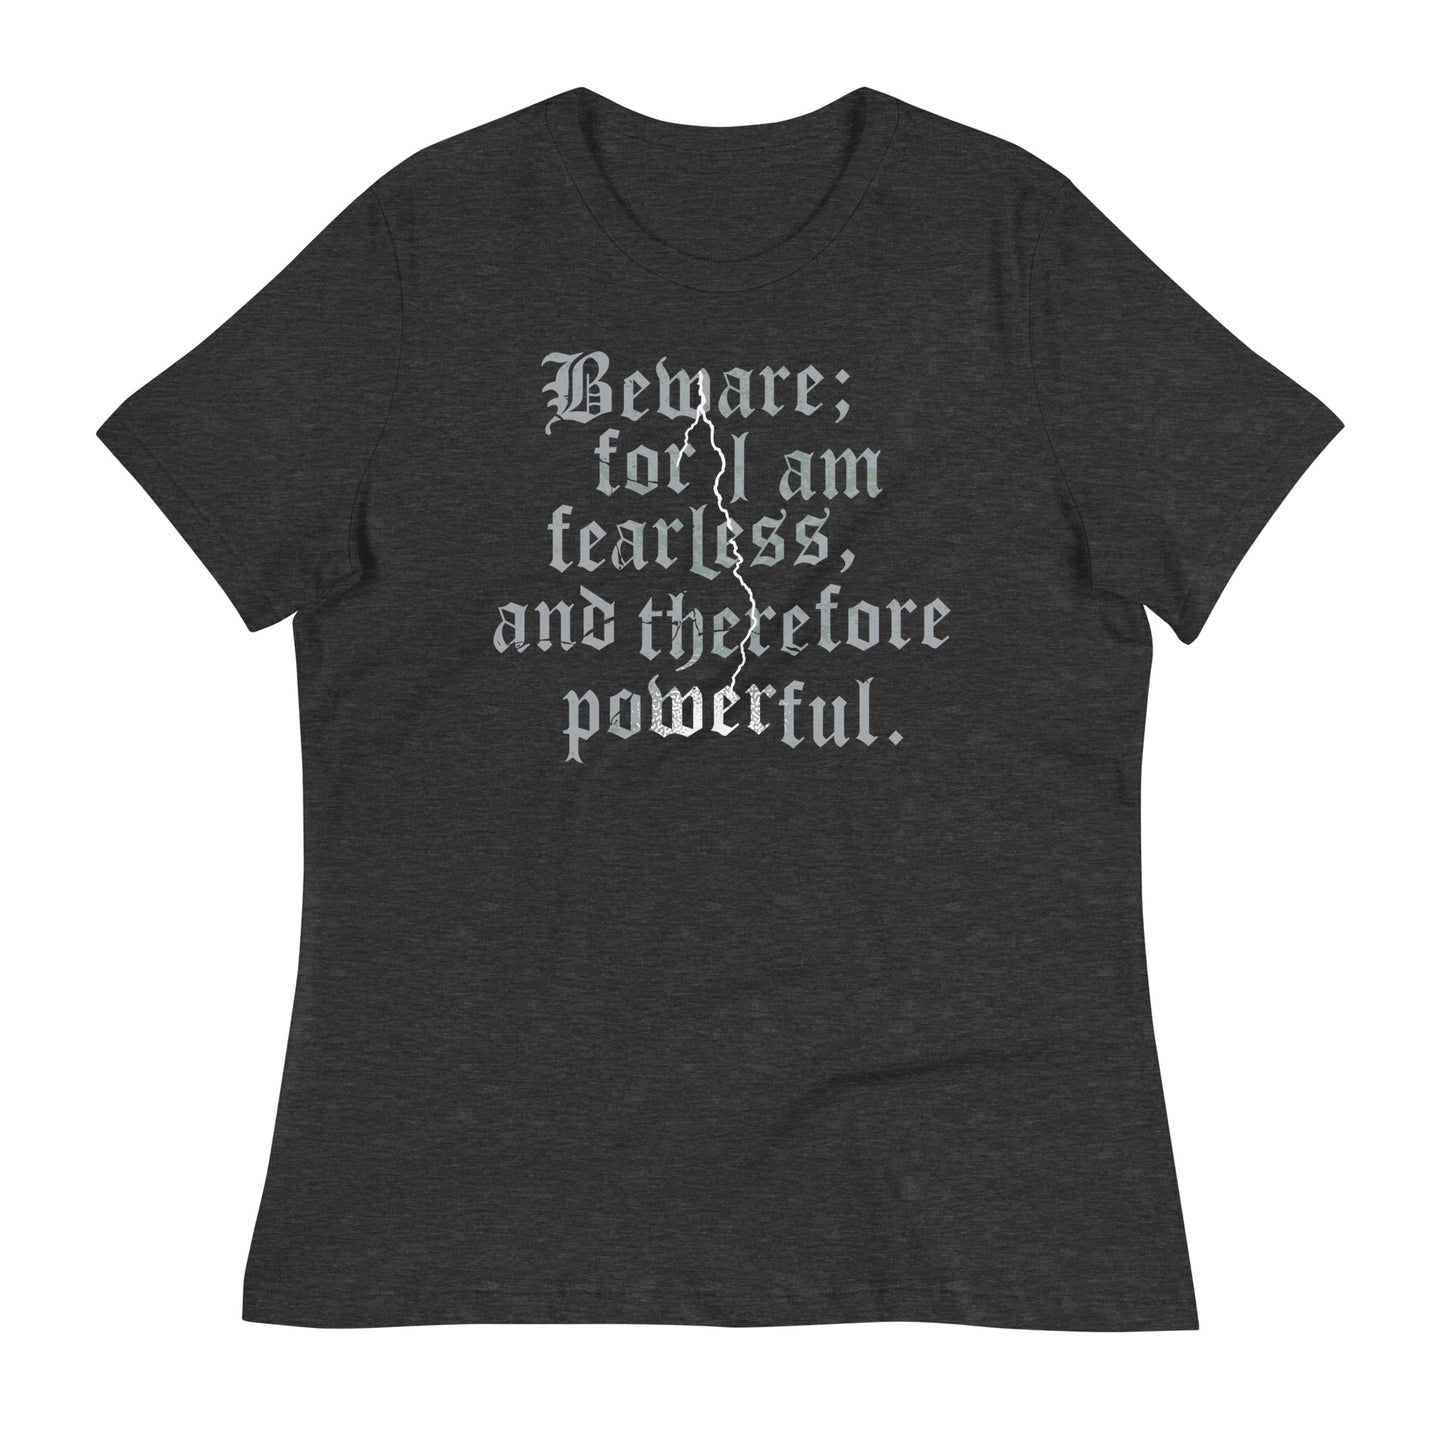 Beware; For I Am Fearless, And Therefore Powerful Women's Signature Tee